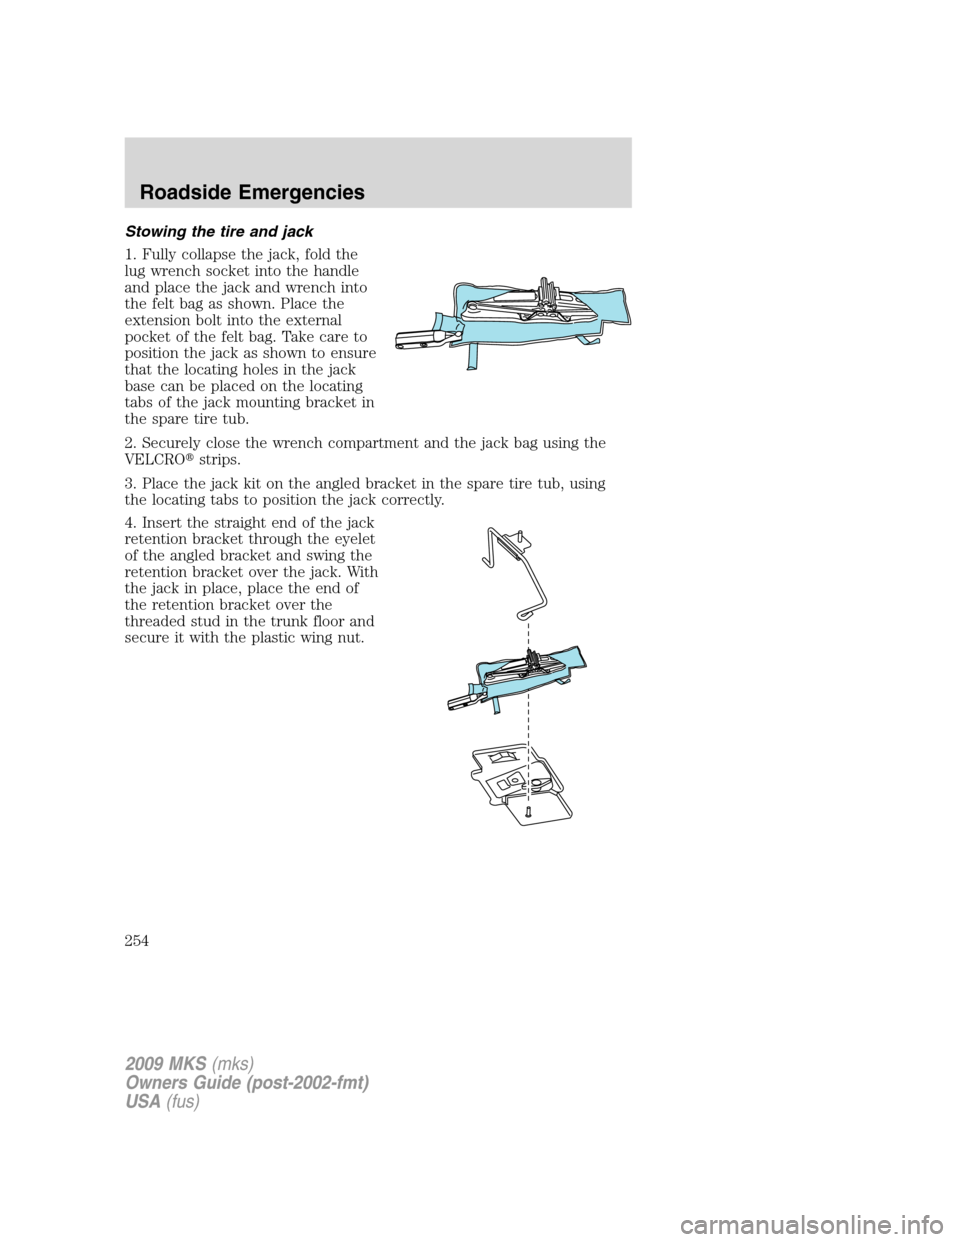 LINCOLN MKS 2009 Owners Manual Stowing the tire and jack
1. Fully collapse the jack, fold the
lug wrench socket into the handle
and place the jack and wrench into
the felt bag as shown. Place the
extension bolt into the external
po